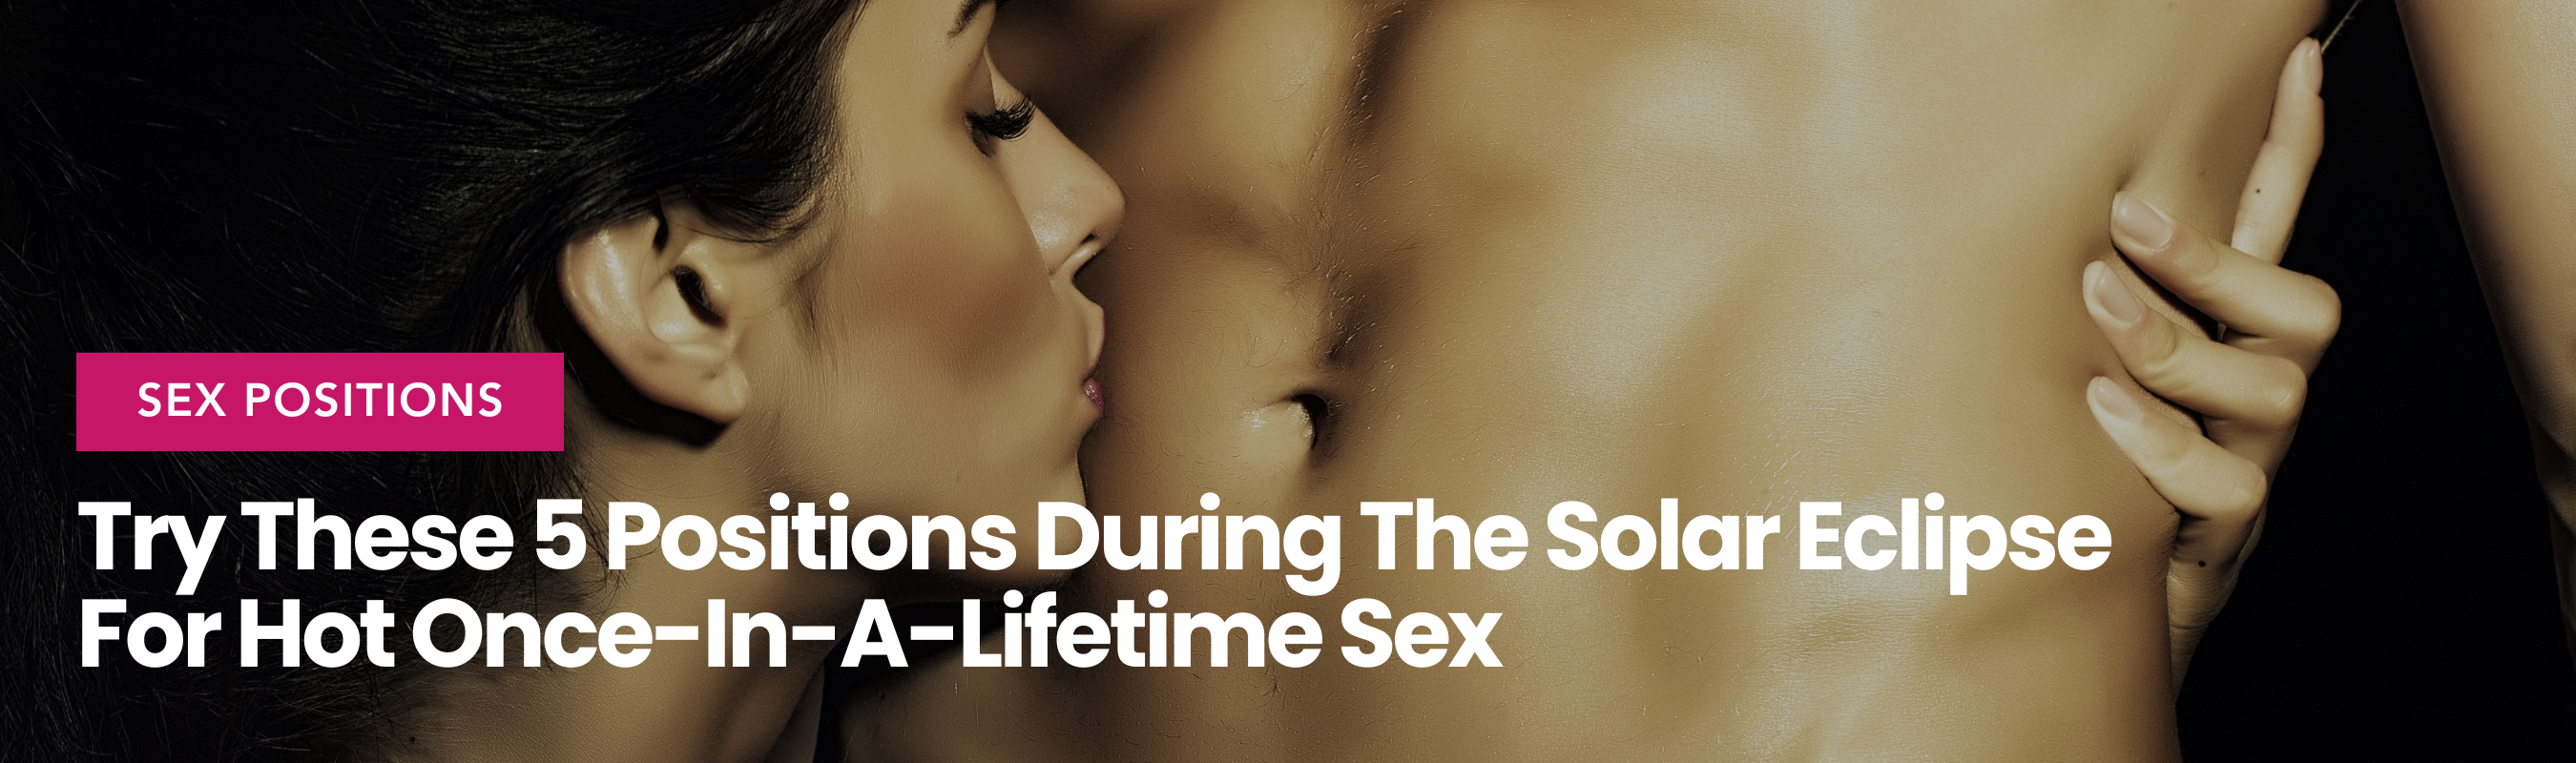 Try These 5 Positions During The Solar Eclipse For Hot Once-In-A-Lifetime Sex